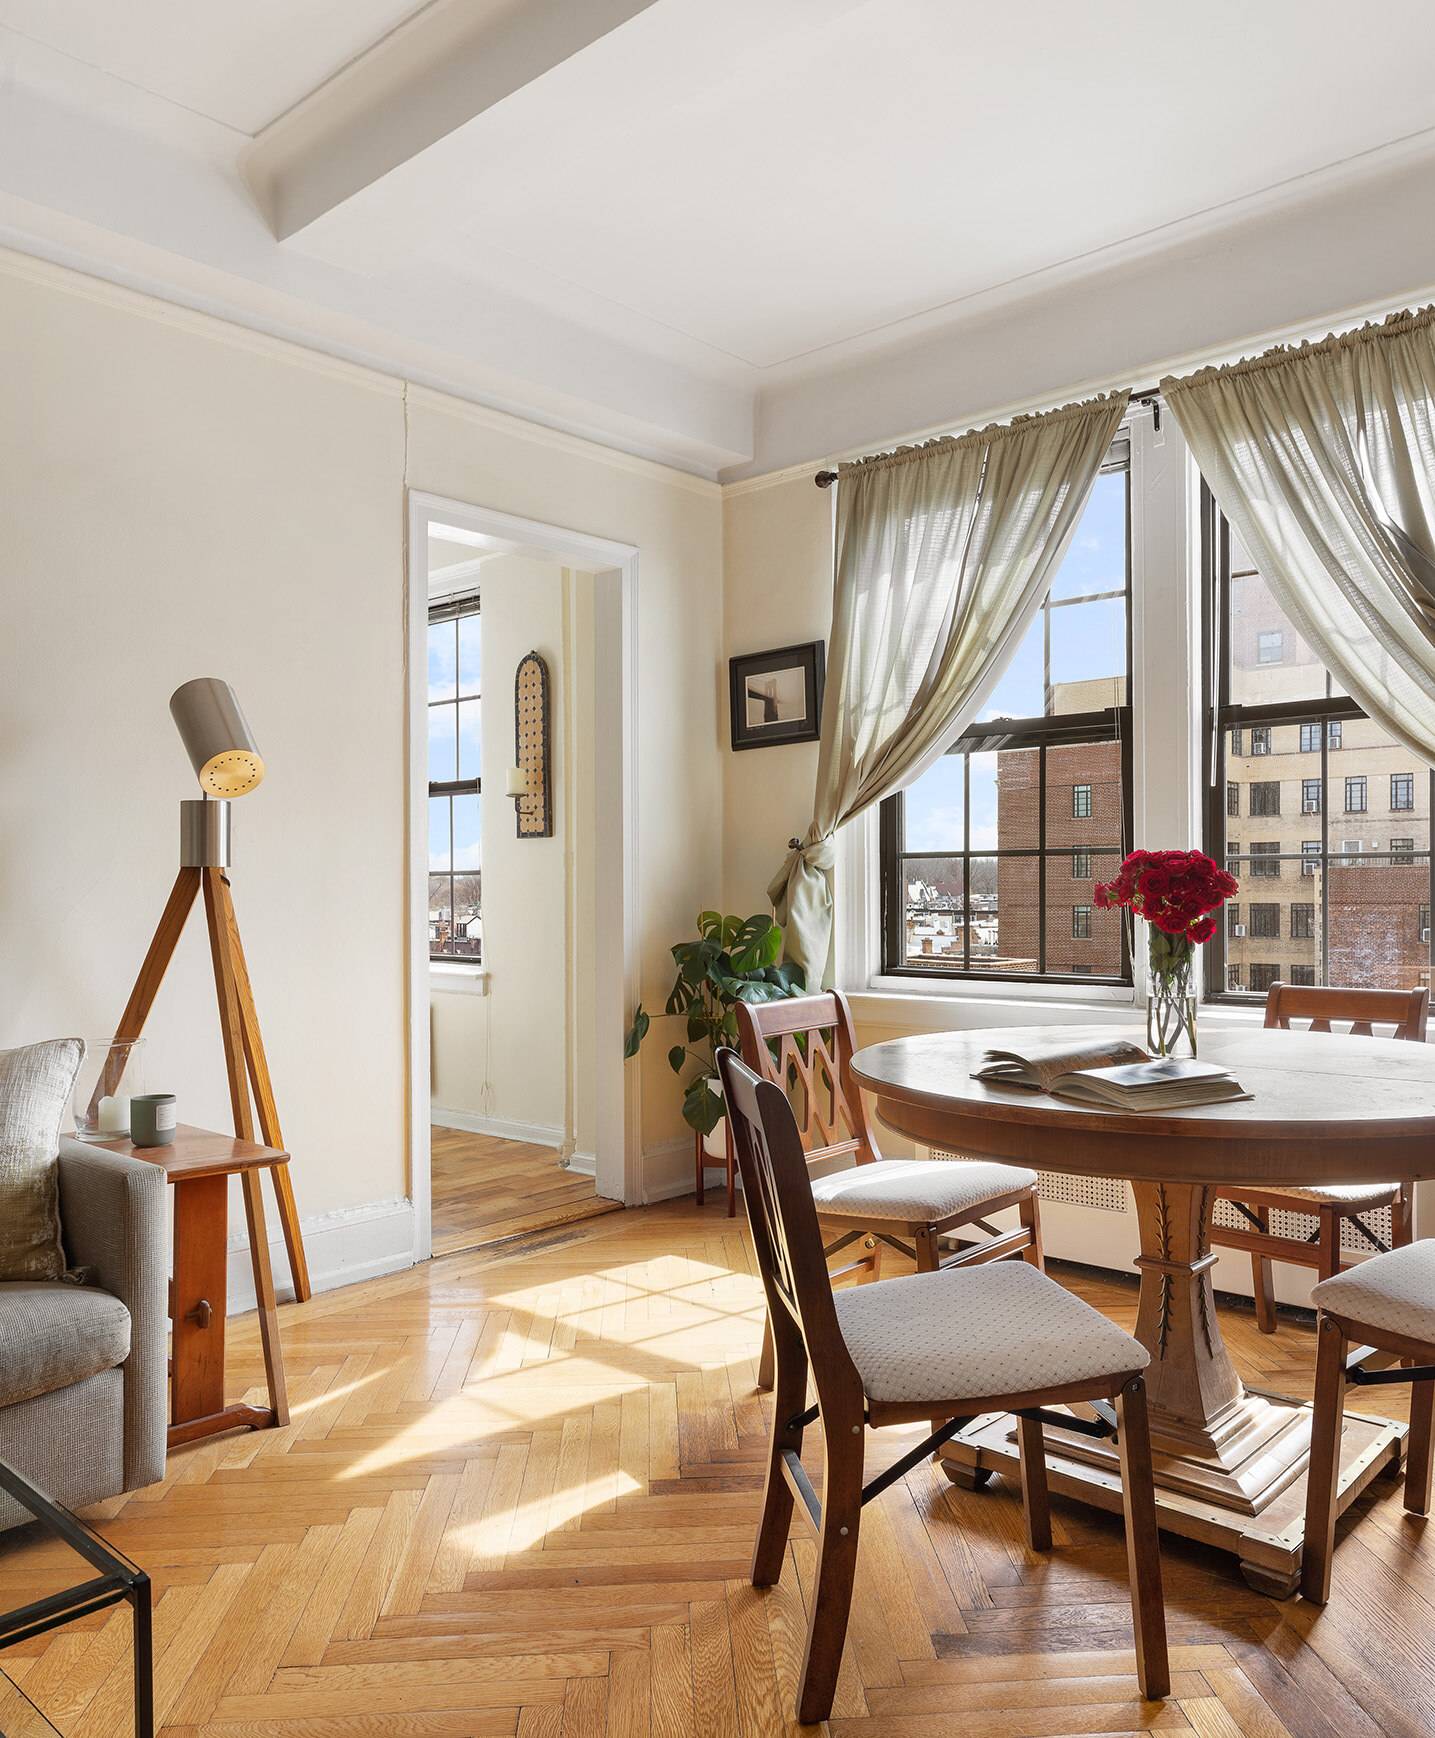 Welcome to 9E at The President a massive one bed, one bath, south facing unit with unobstructed views for miles toward the Prospect Park's treetops and brownstone Brooklyn.